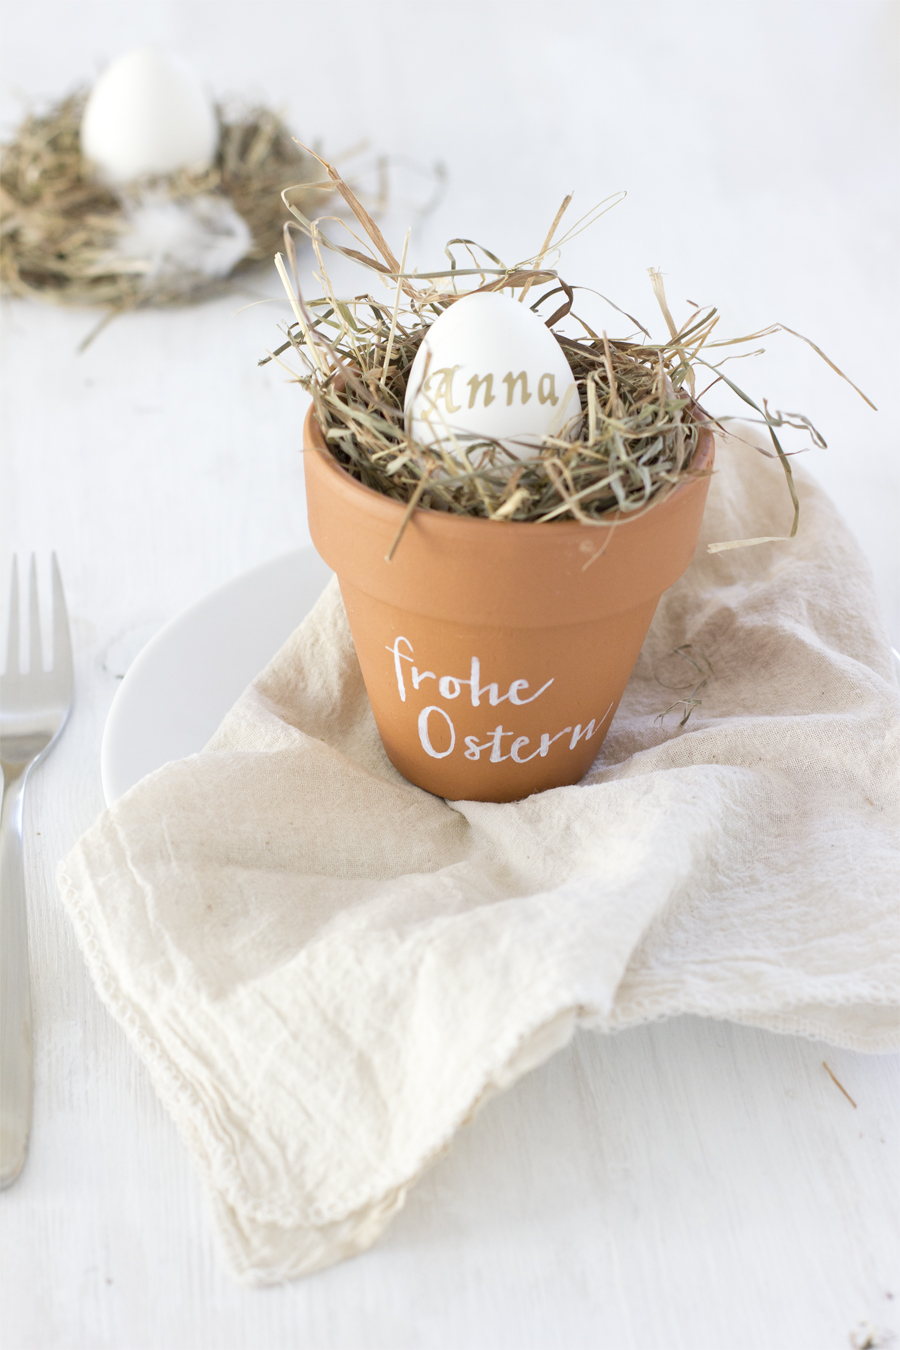 Easter styling and photography for Alpenwelt Magazin